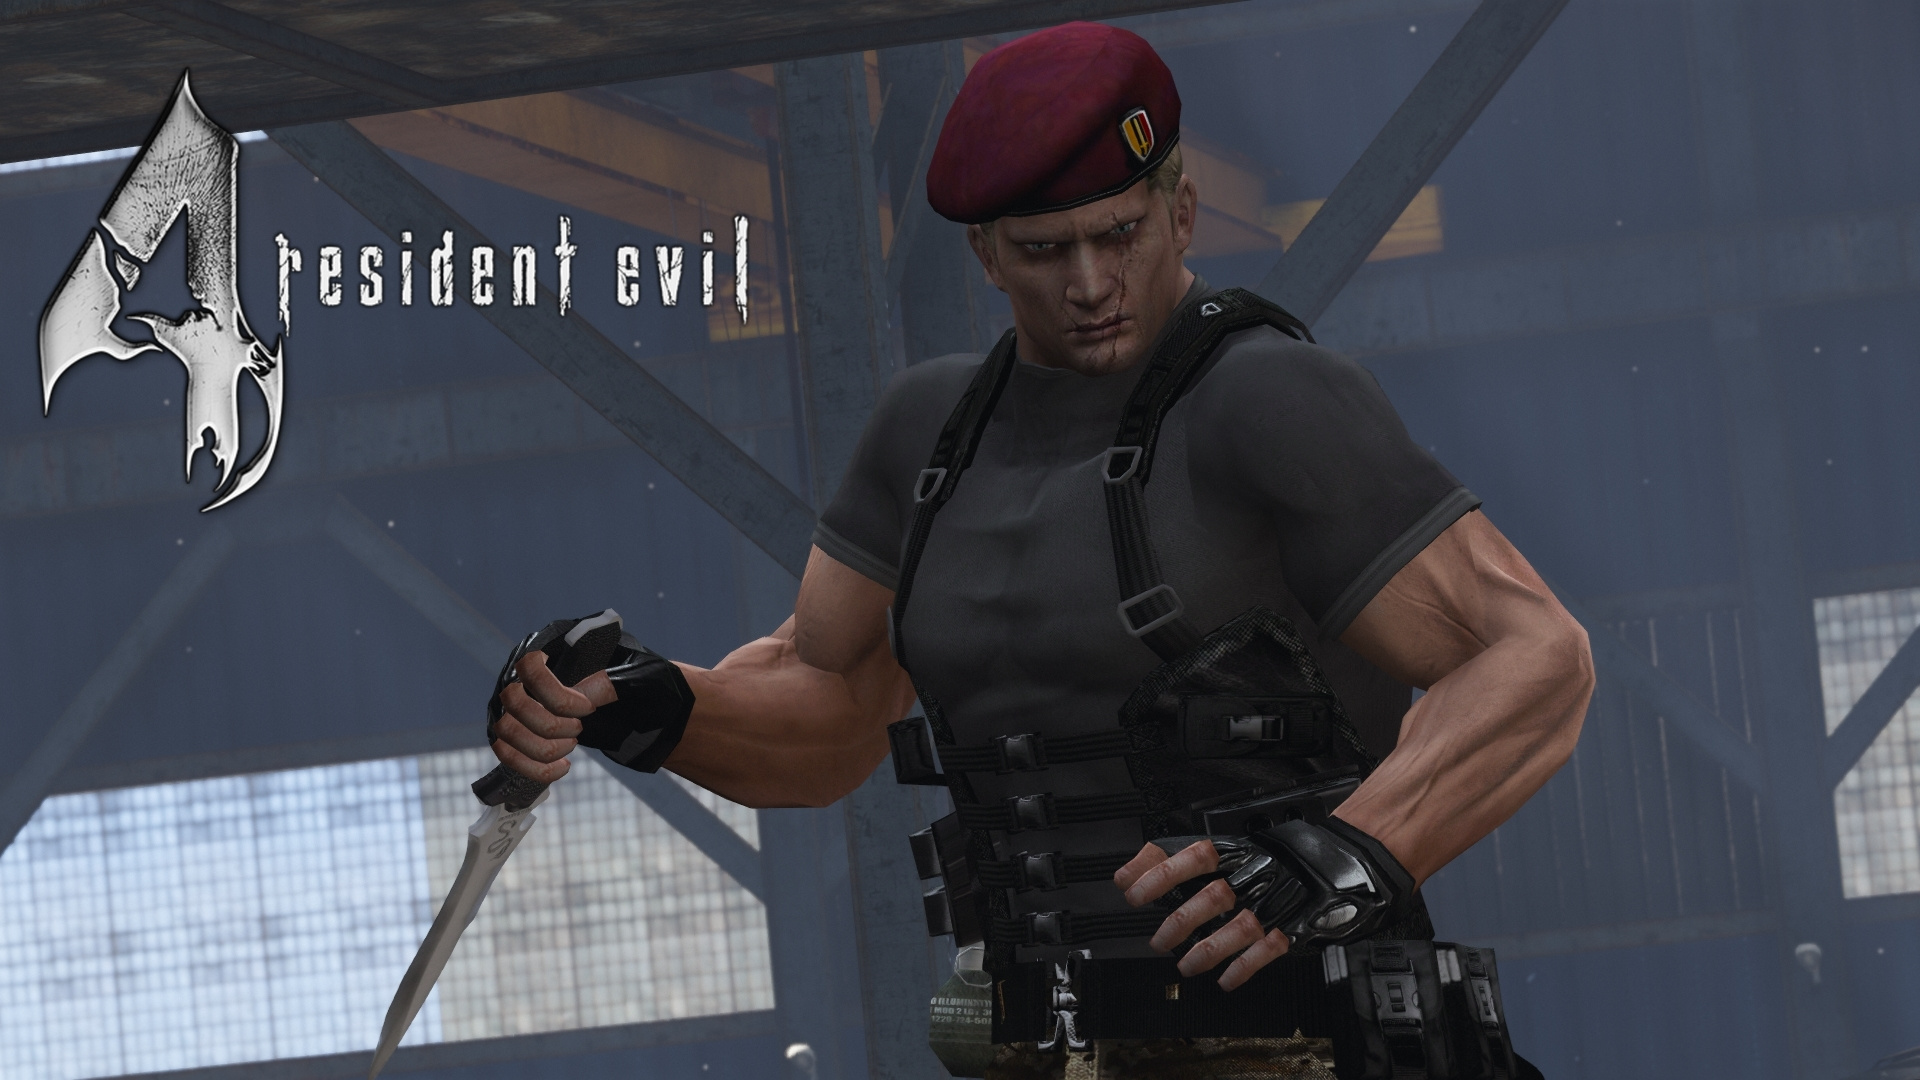 Jack Krauser - Resident Evil 4 HD version with classic outfit